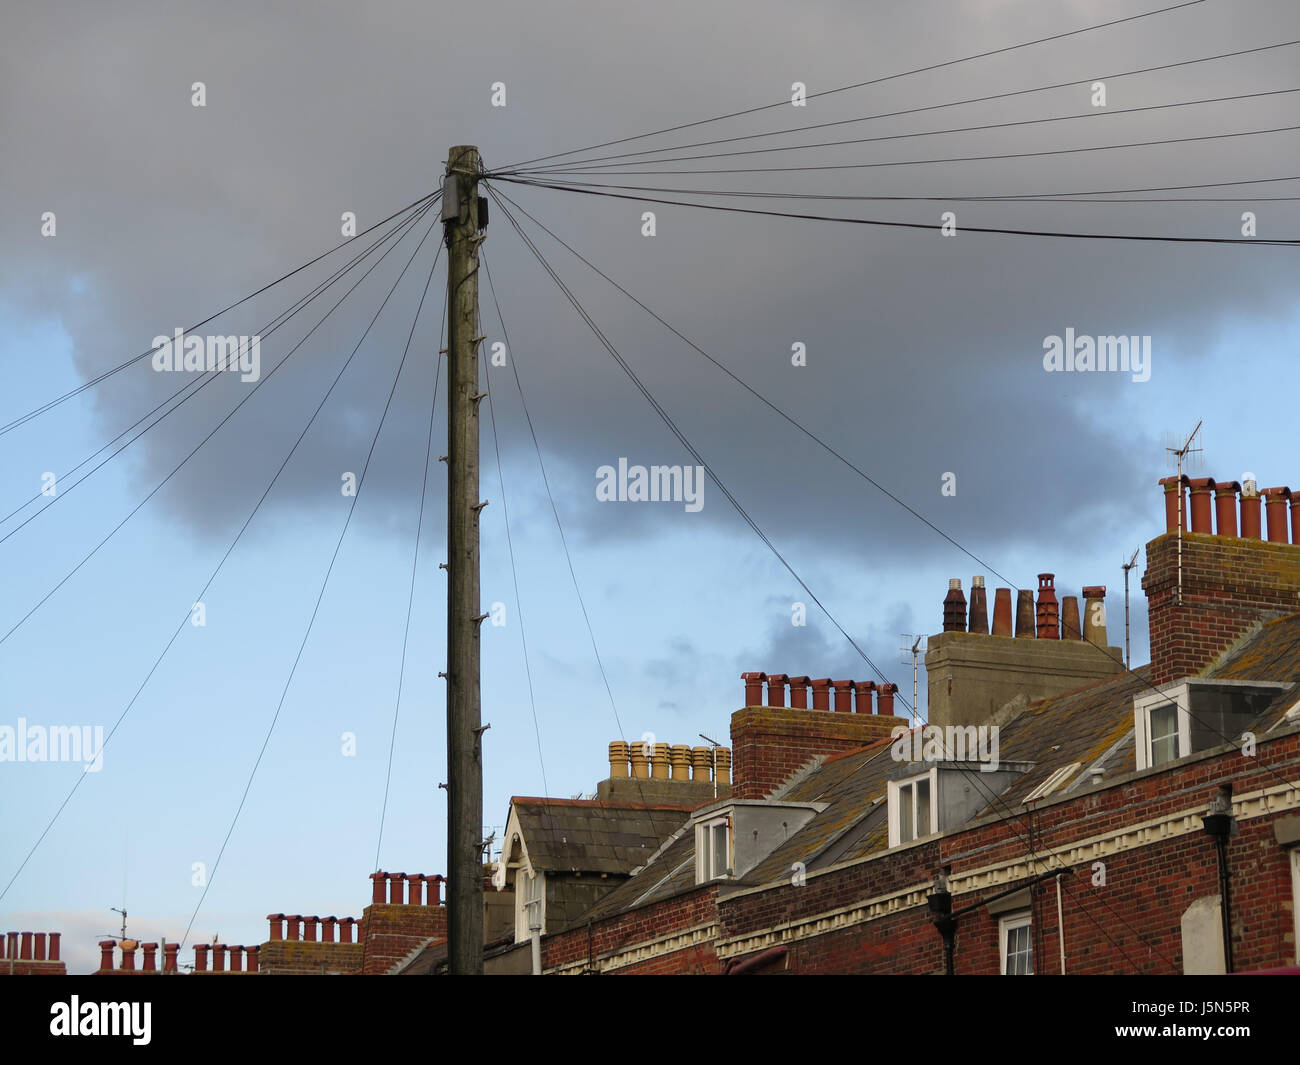 Telegraph Pole and Chimney Stacks against cloudy sky in Weymouth, Dorset, UK Stock Photo